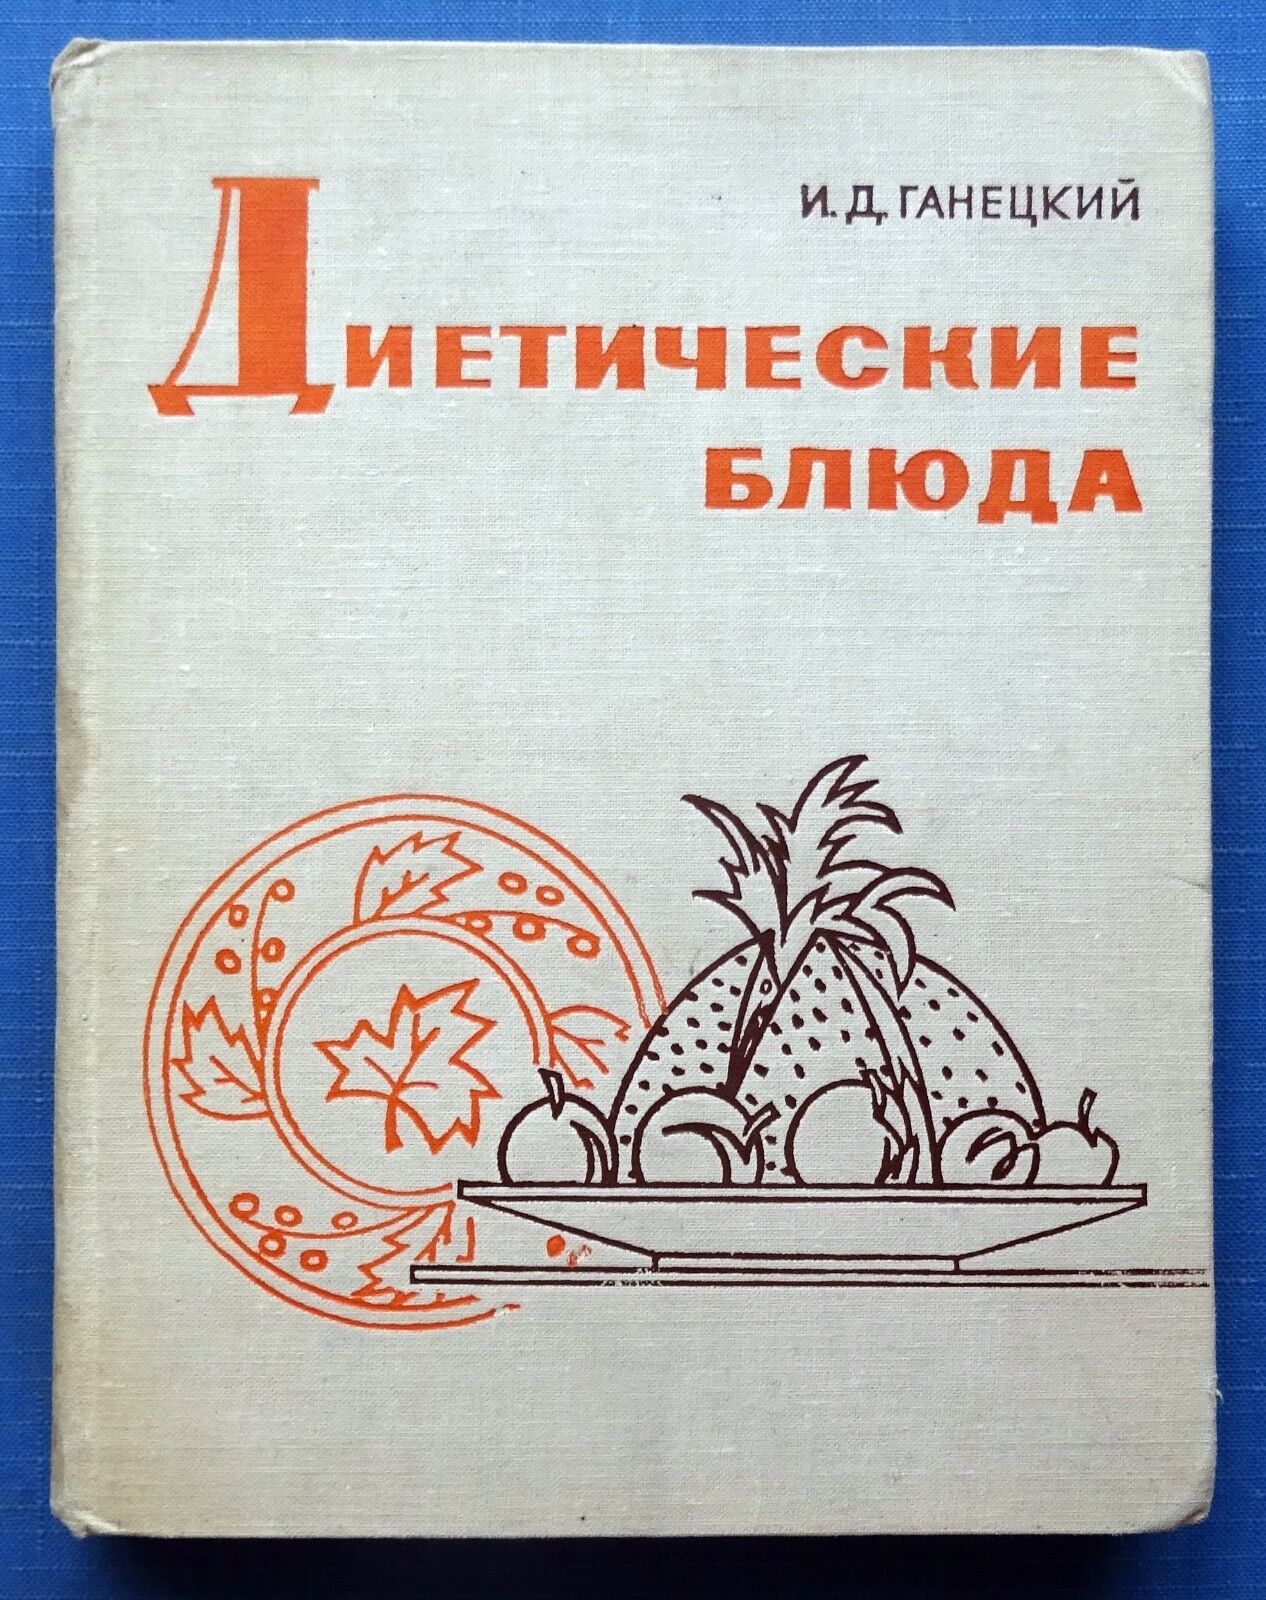 1969 Russian Soviet book Illustrated Dietary dishes Ganetsky Health Food recipes